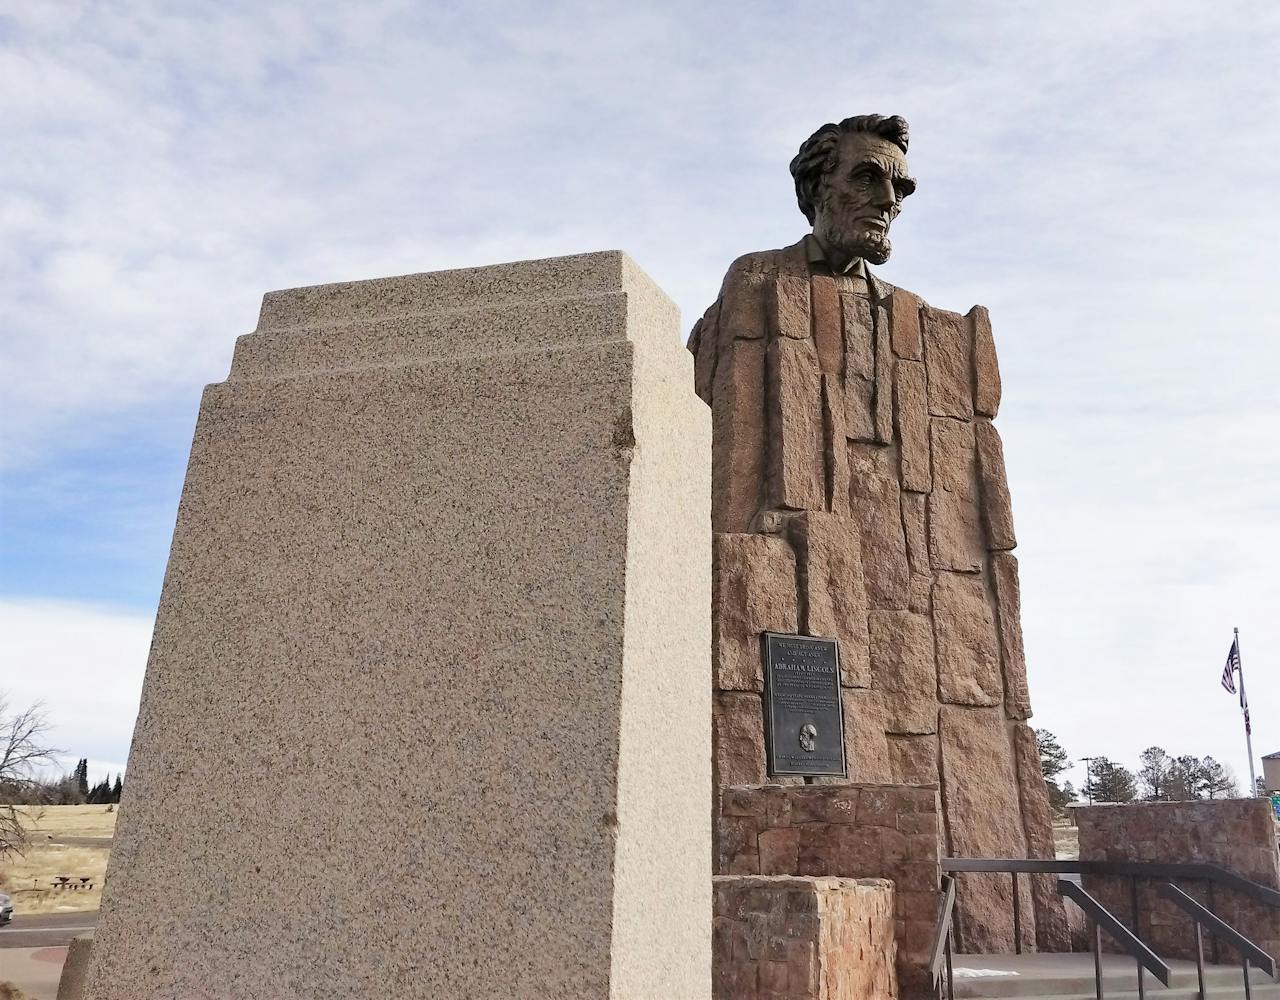 This bust of Lincoln sits on the top of Mount Sherman at the I-80 Summit Rest Area East of Laramie, Wyoming, known to many simply as 'Lincoln's Noggin'.' Did you make it over Lincoln's Noggin' yet? Nope, still shut down at Laramie. ...